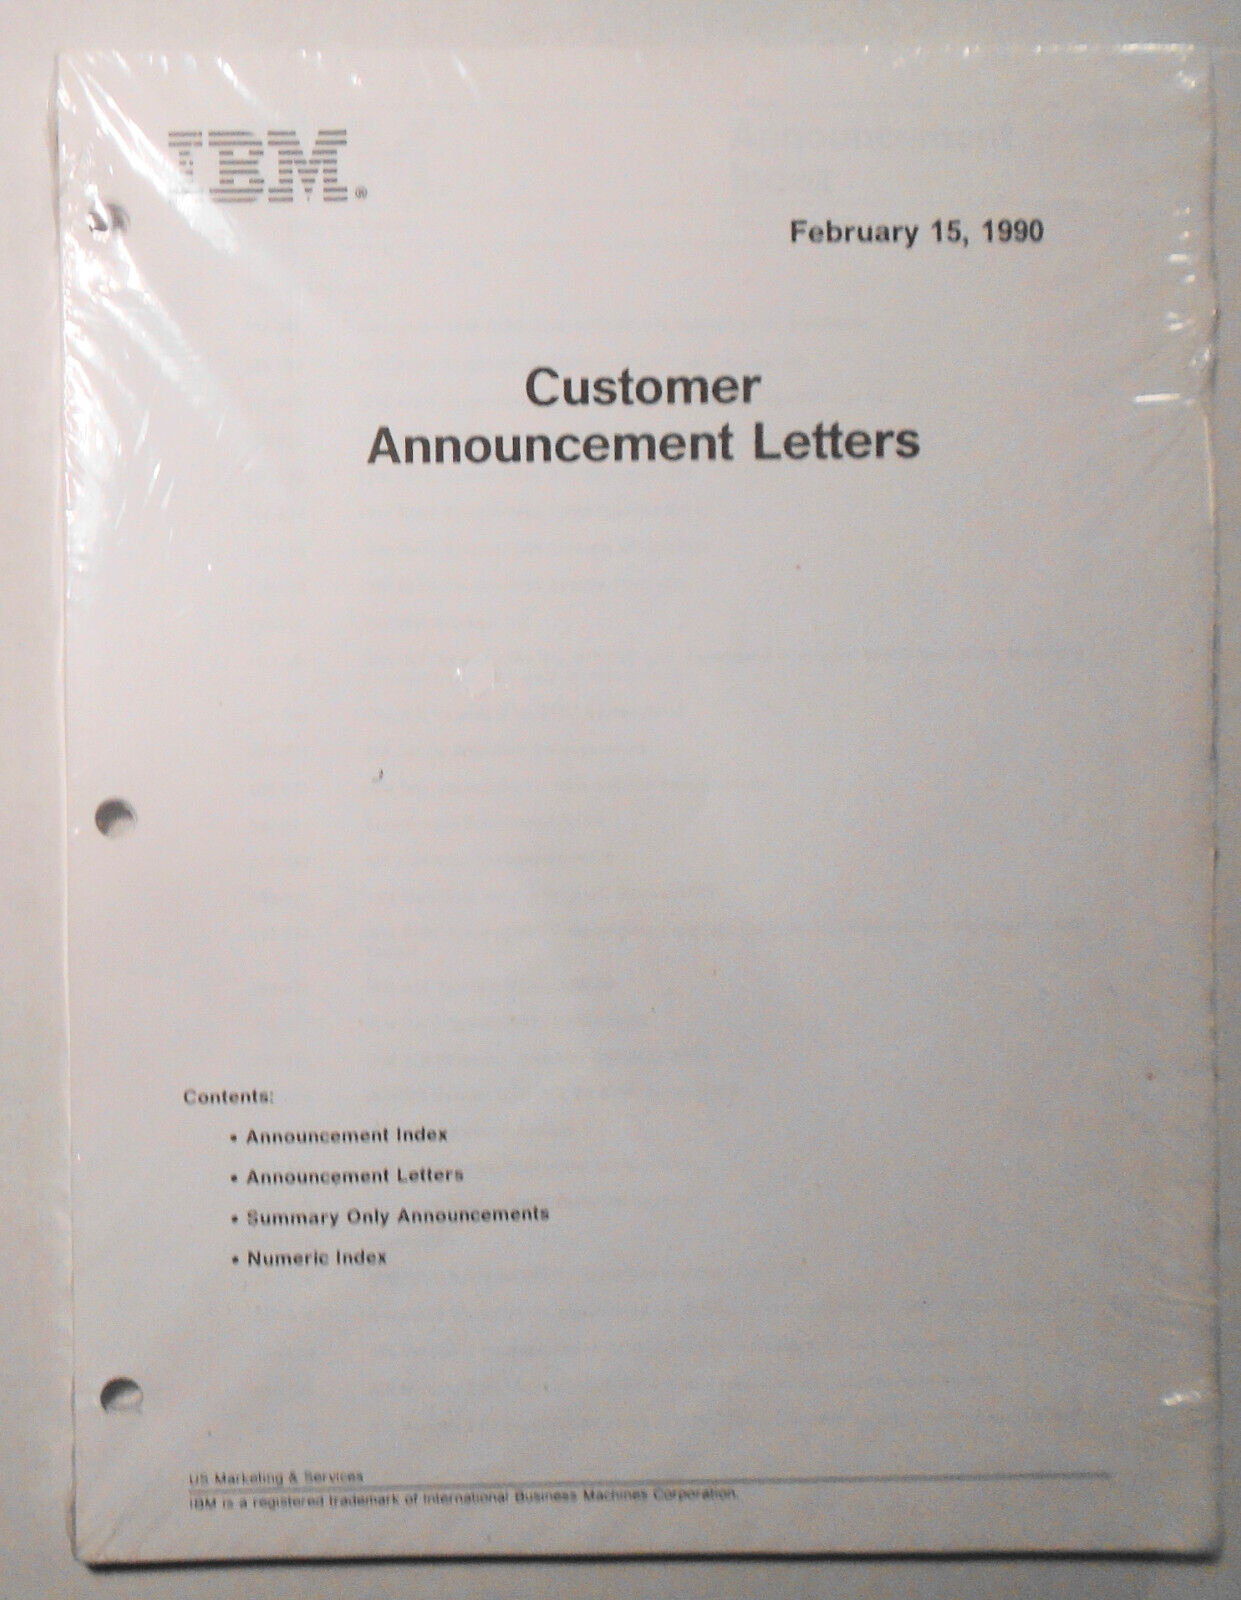 IBM Customer Announcement  Letters - February 15, 1990 - AIX, RISC System/6000